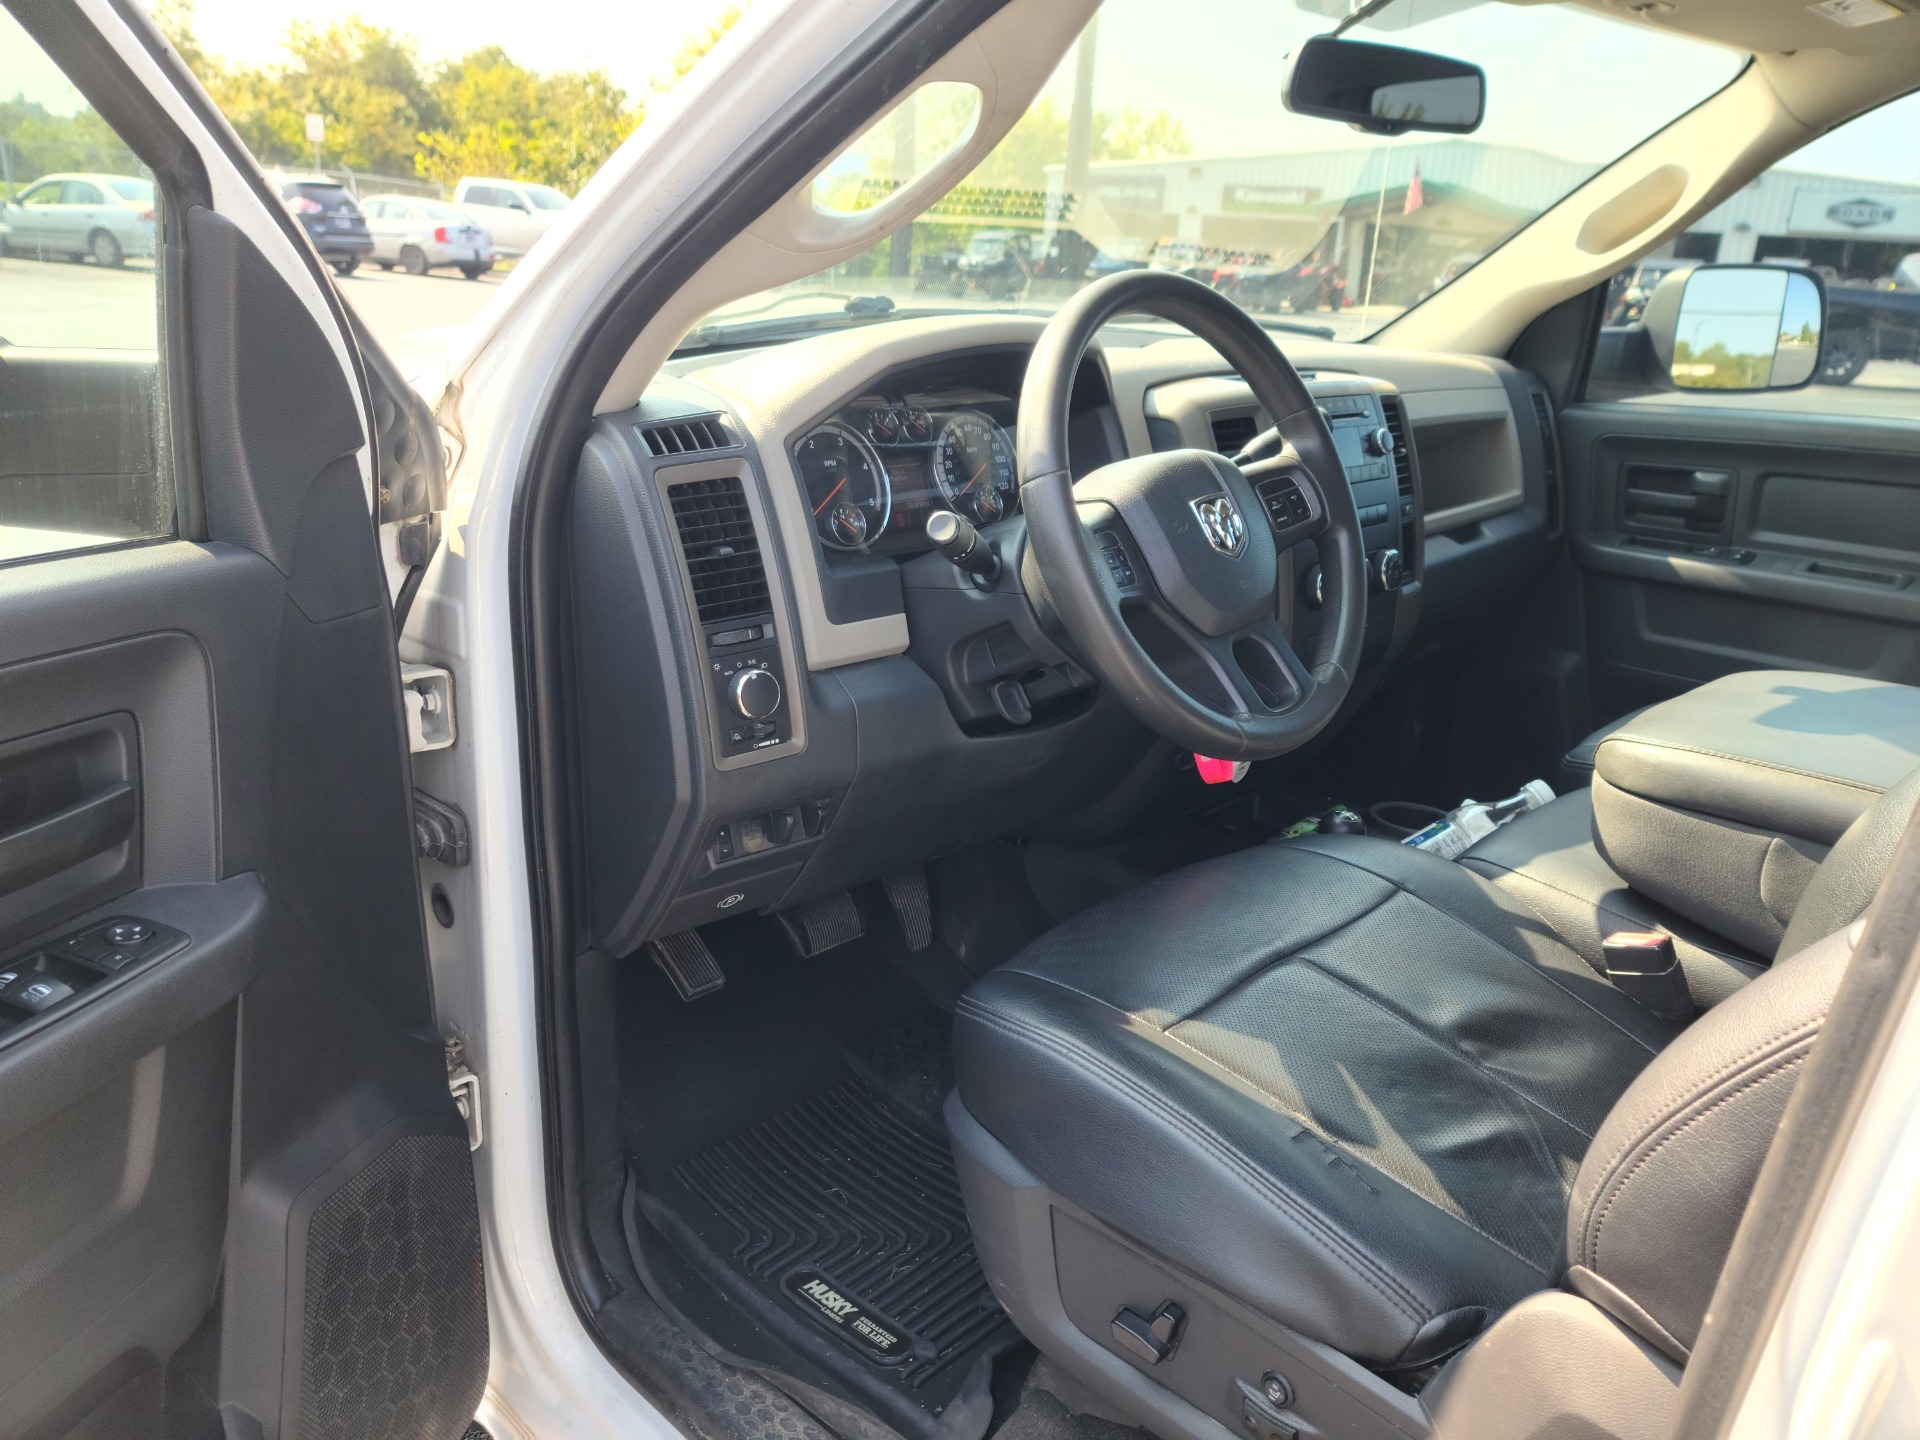 2012 Dodge Ram 3500 4WD Crew Cab ST in Clinton, Tennessee - Photo 9